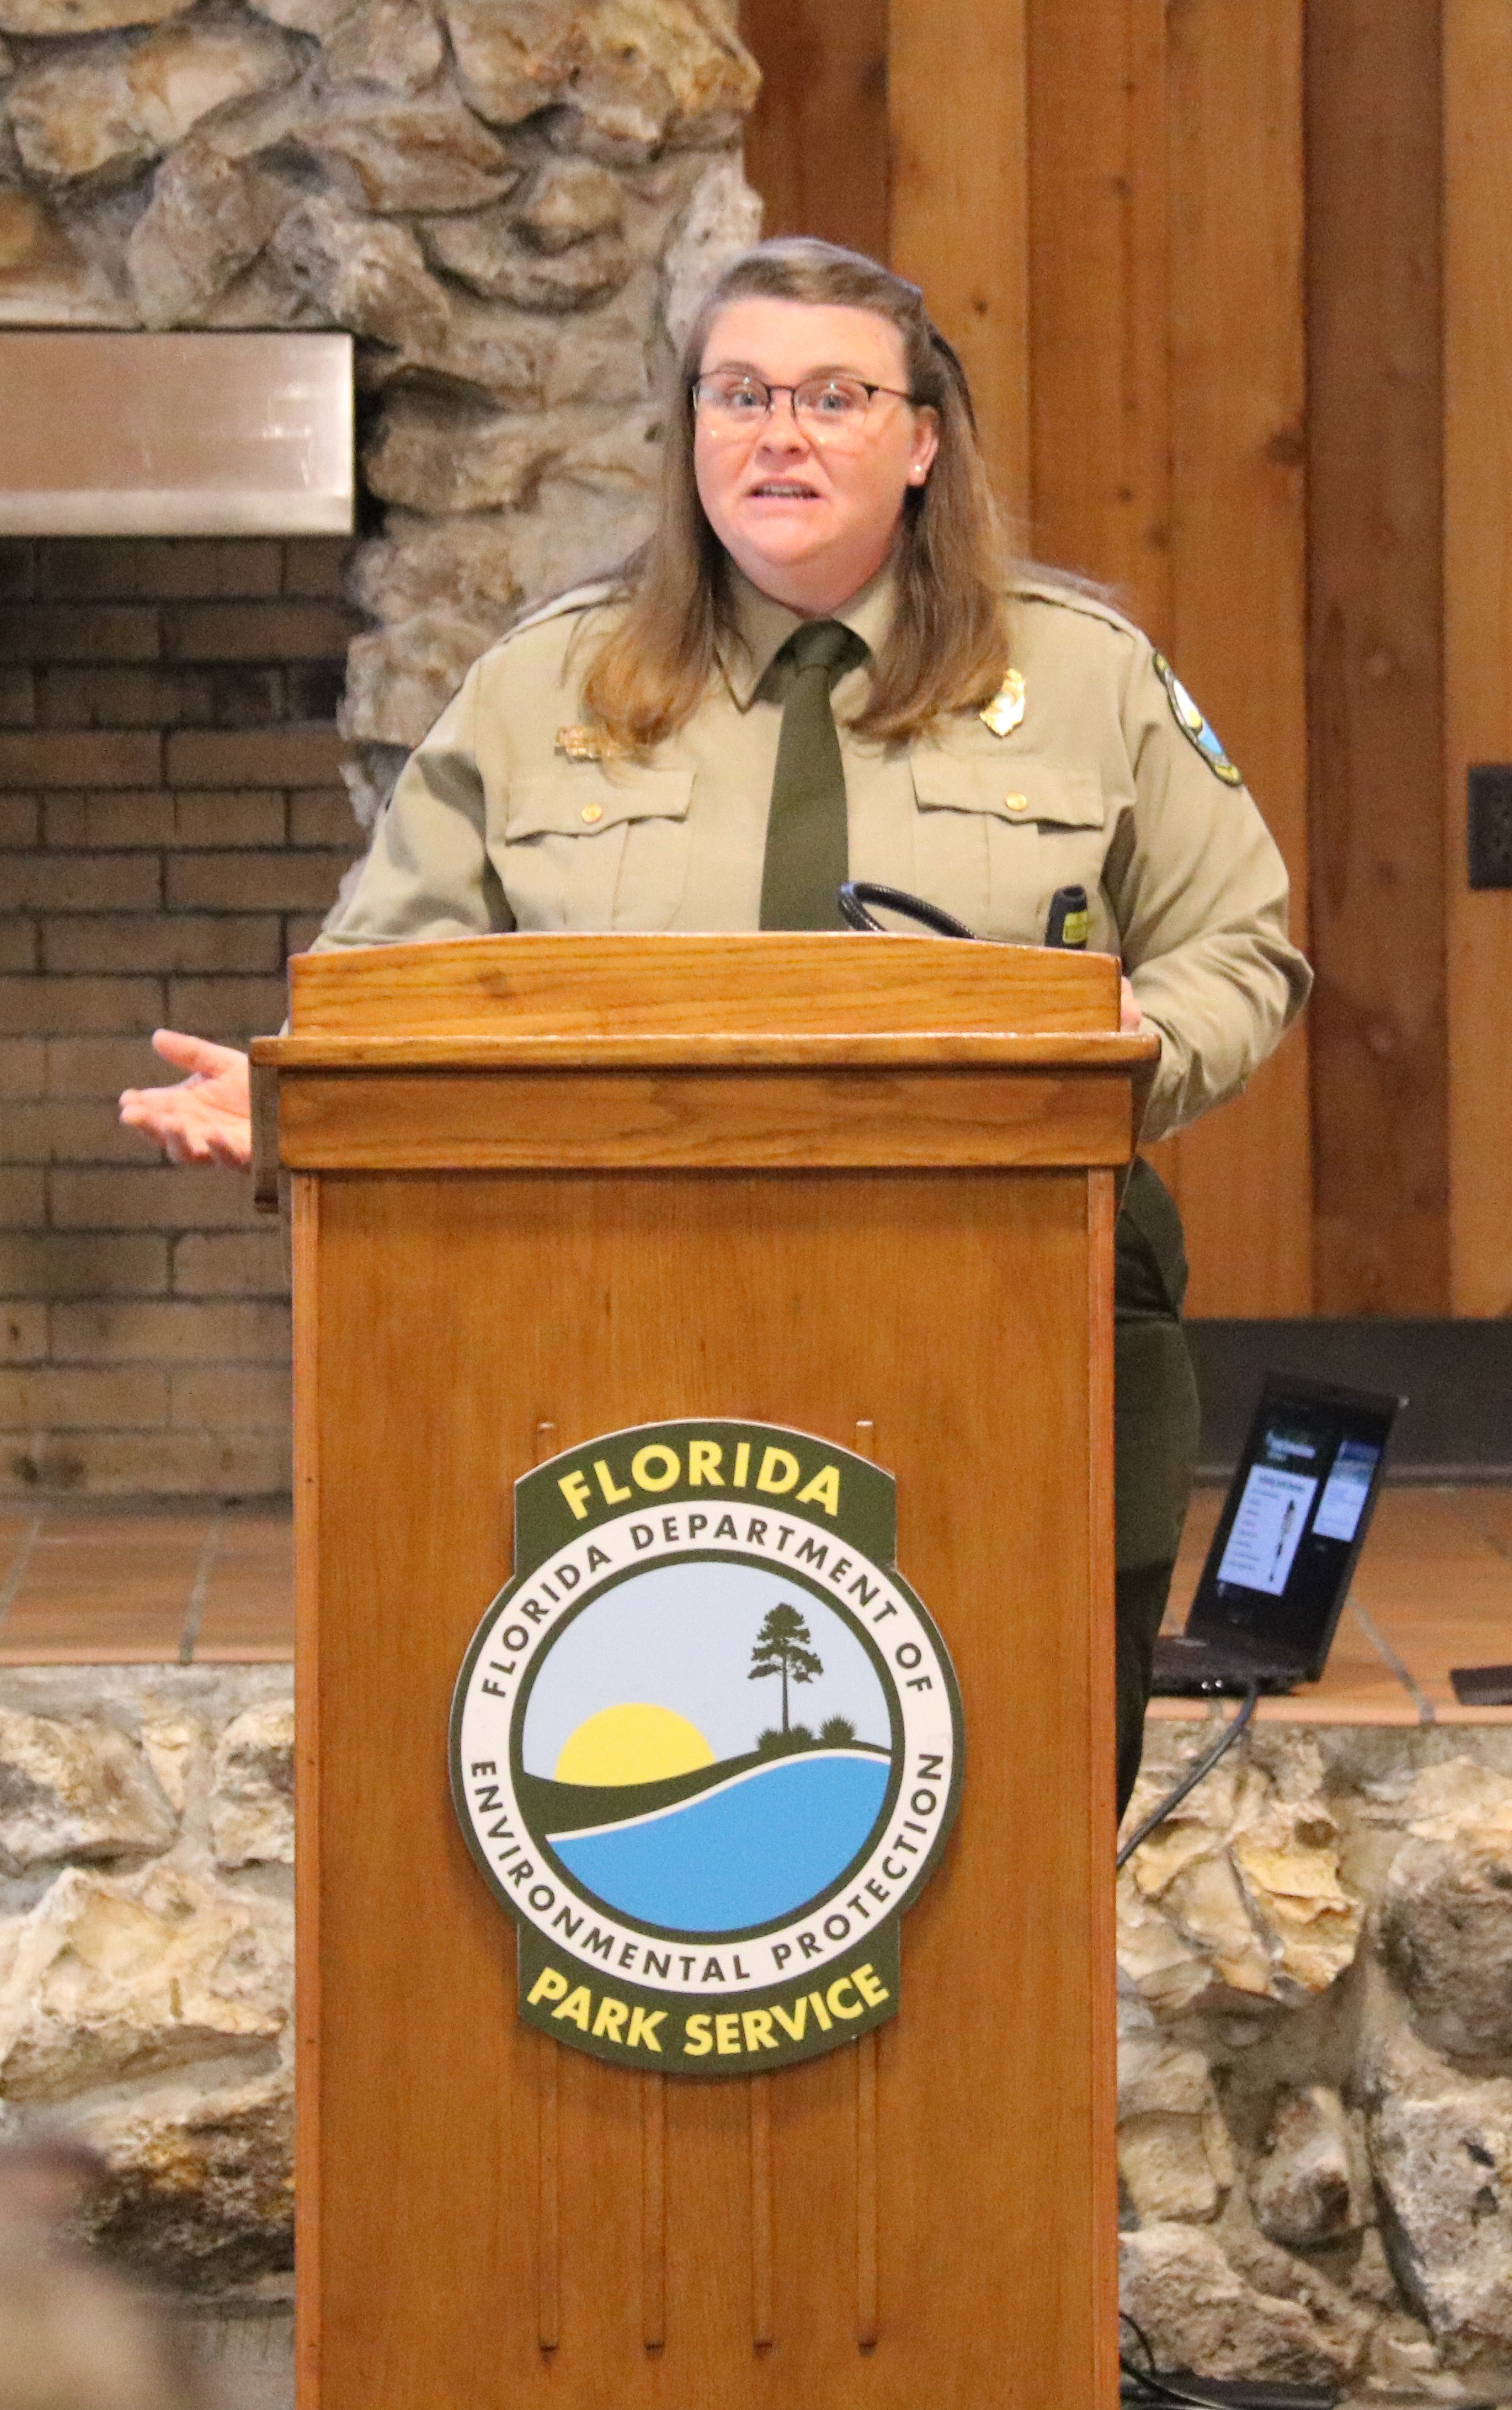 Heather Goston standing behind a podium, speaking to a group of assistant park managers and park managers.